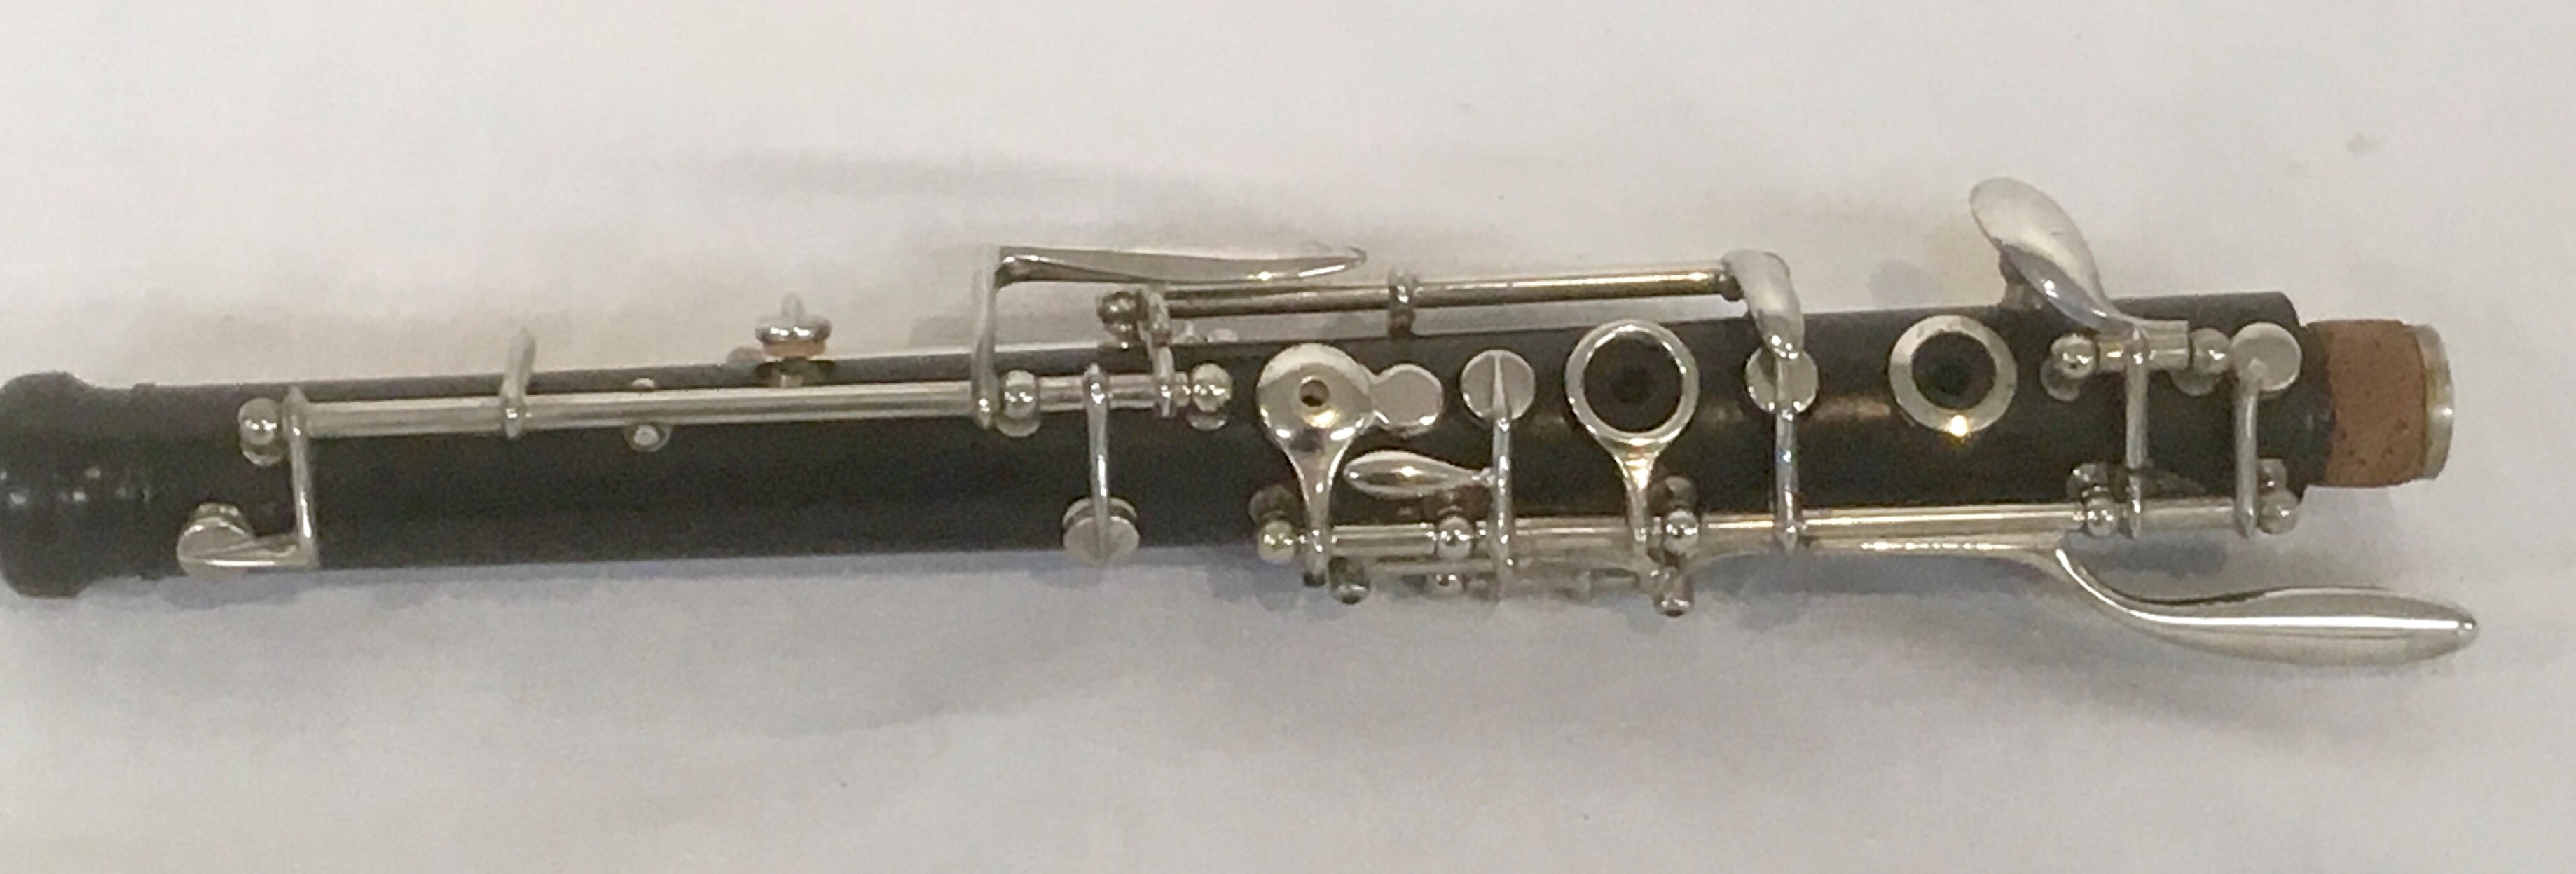 Howarth S2 ebony oboe with thumbplate and semi automatic octaves, manufactured January 1954 with - Image 18 of 23